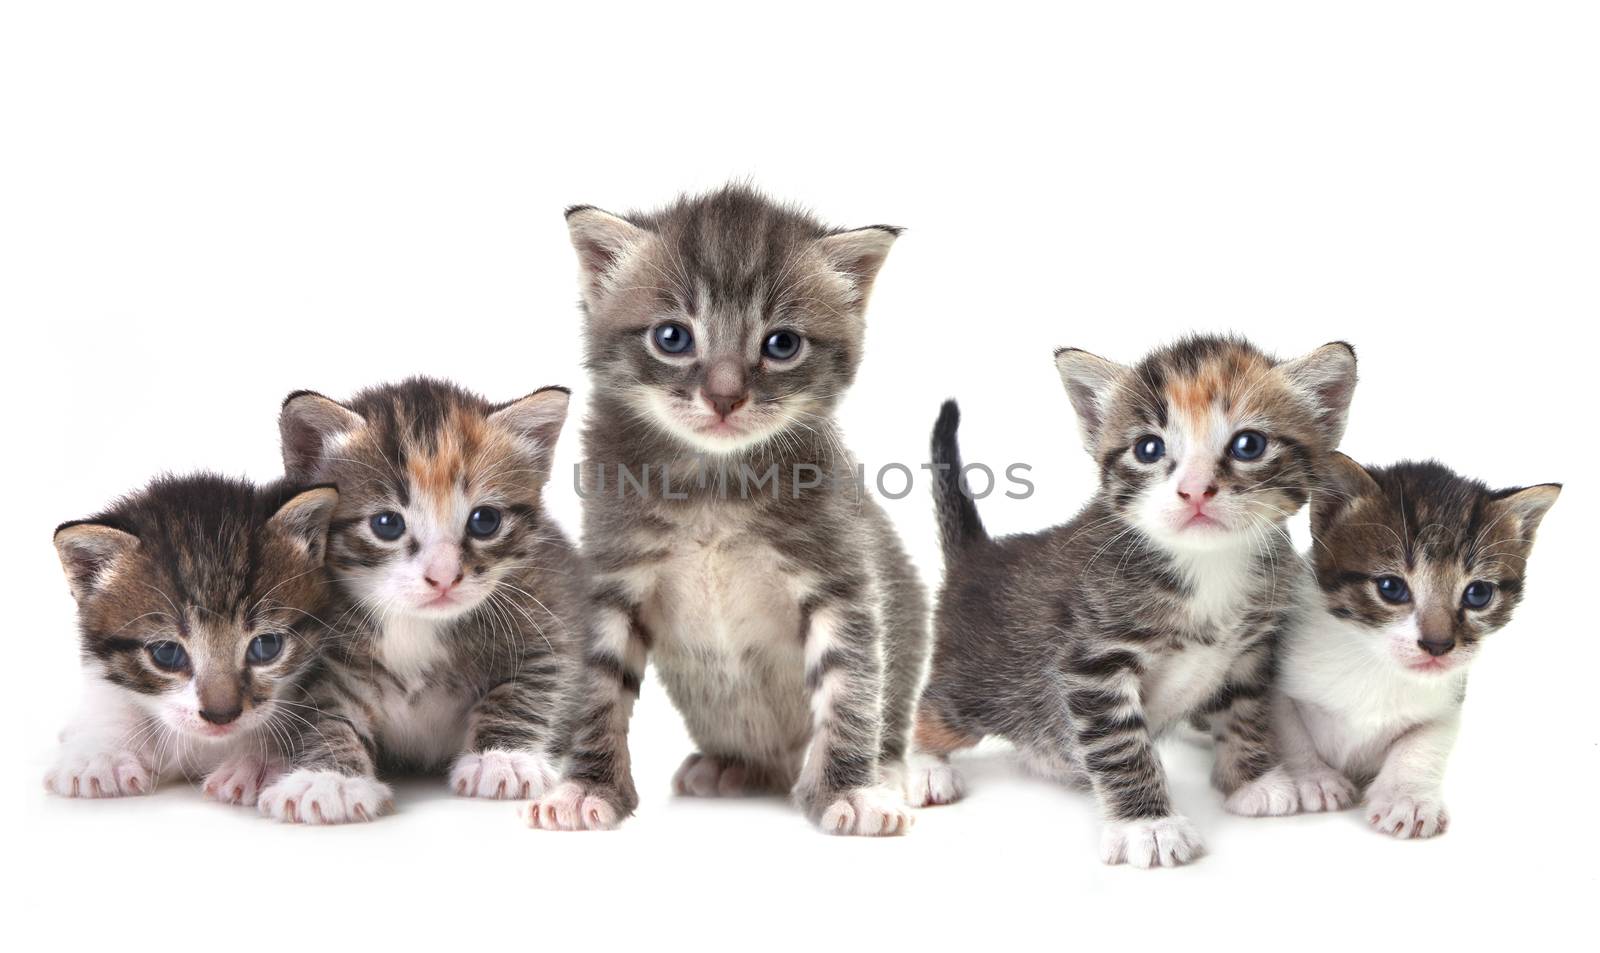 Adorable Cute Kittens on White Background